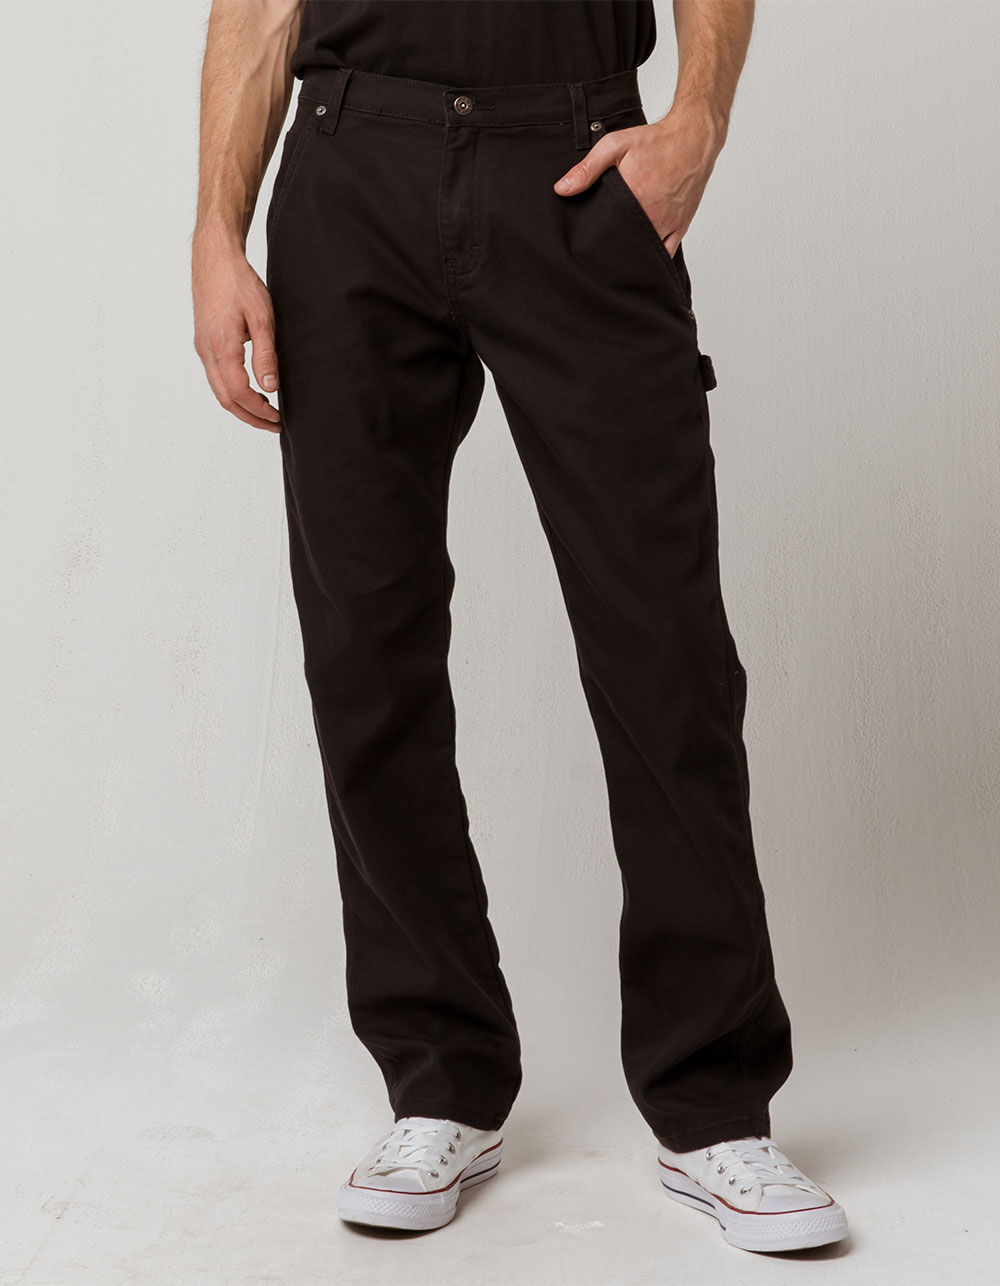  Dickies mens Tough Max Duck Carpenter Pants, Stonewashed Black,  30W x 30L US: Clothing, Shoes & Jewelry